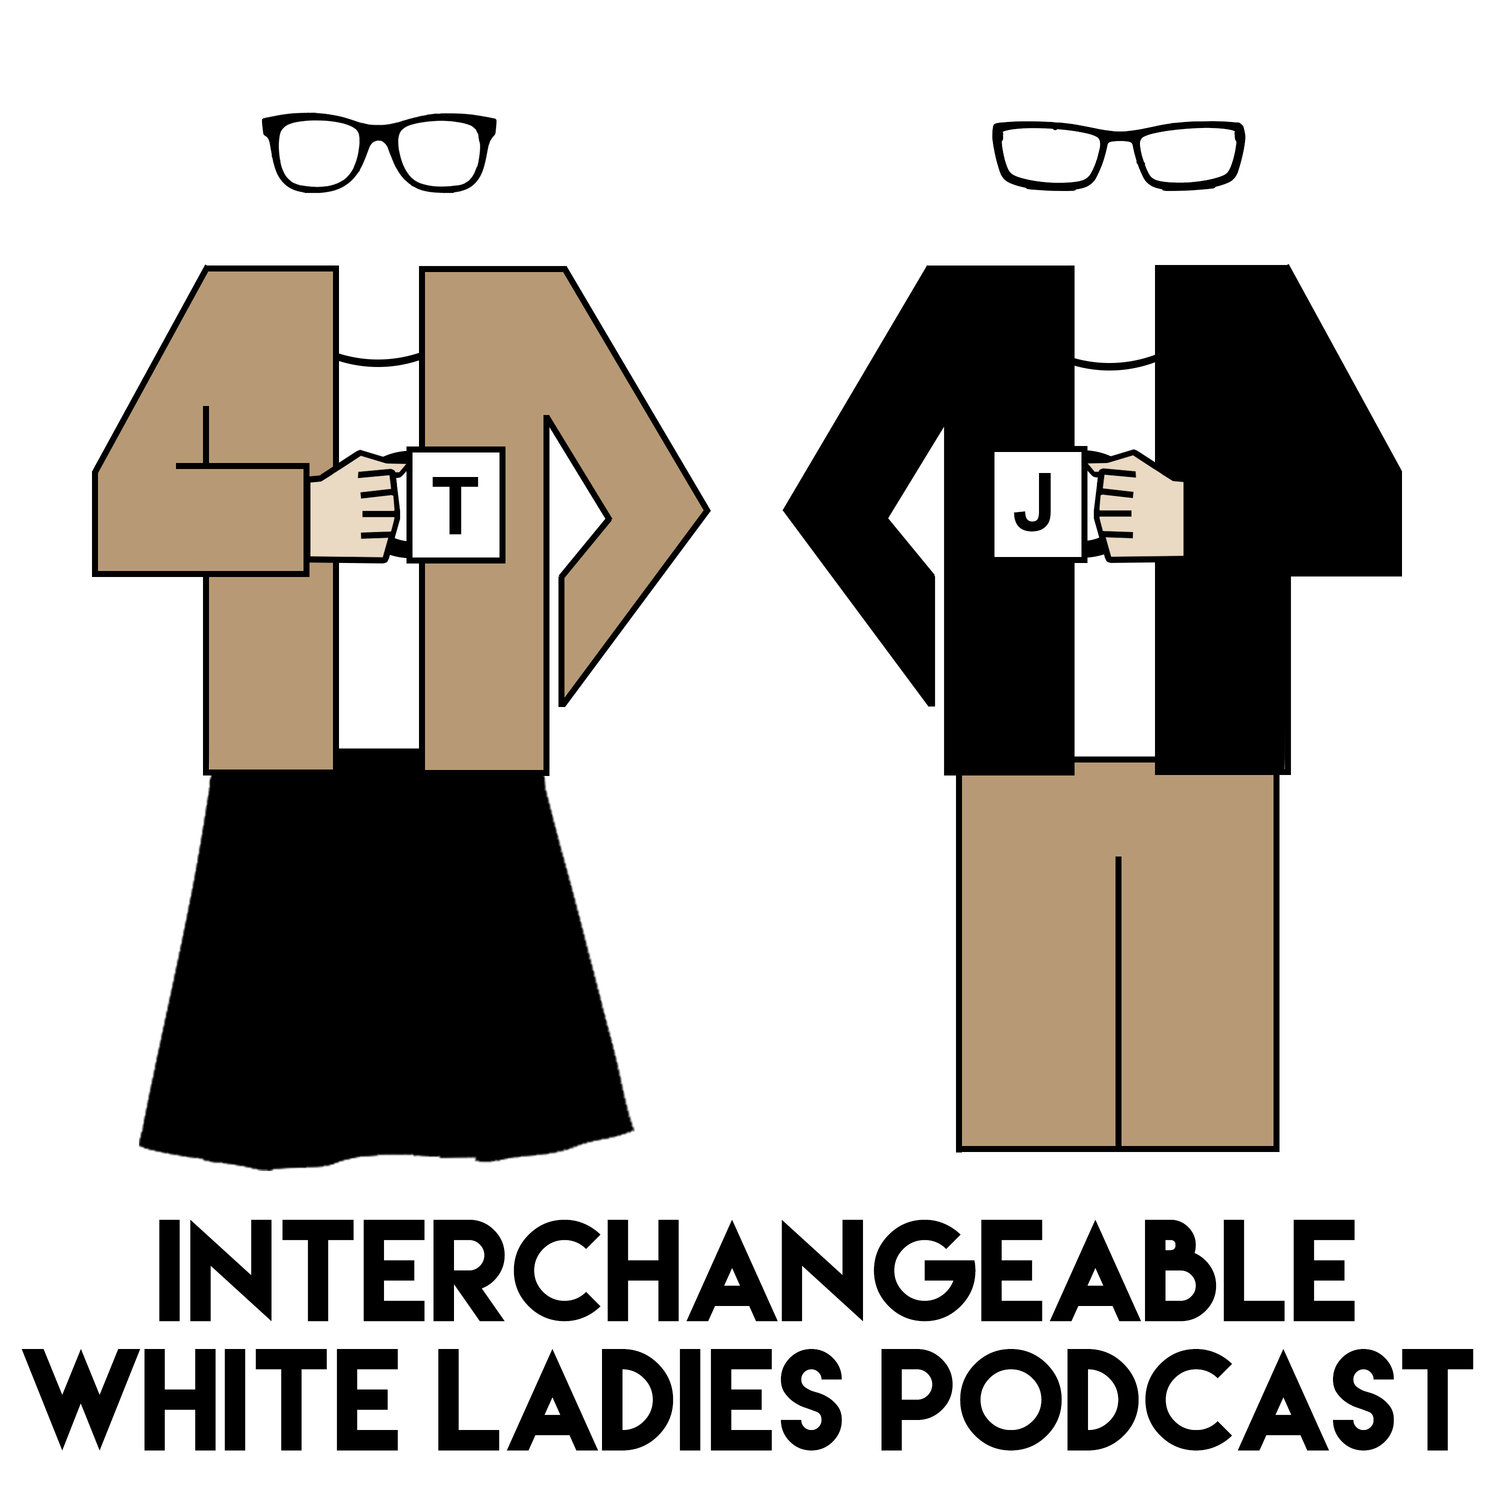 Episode 0: Introducing Interchangeable White Ladies